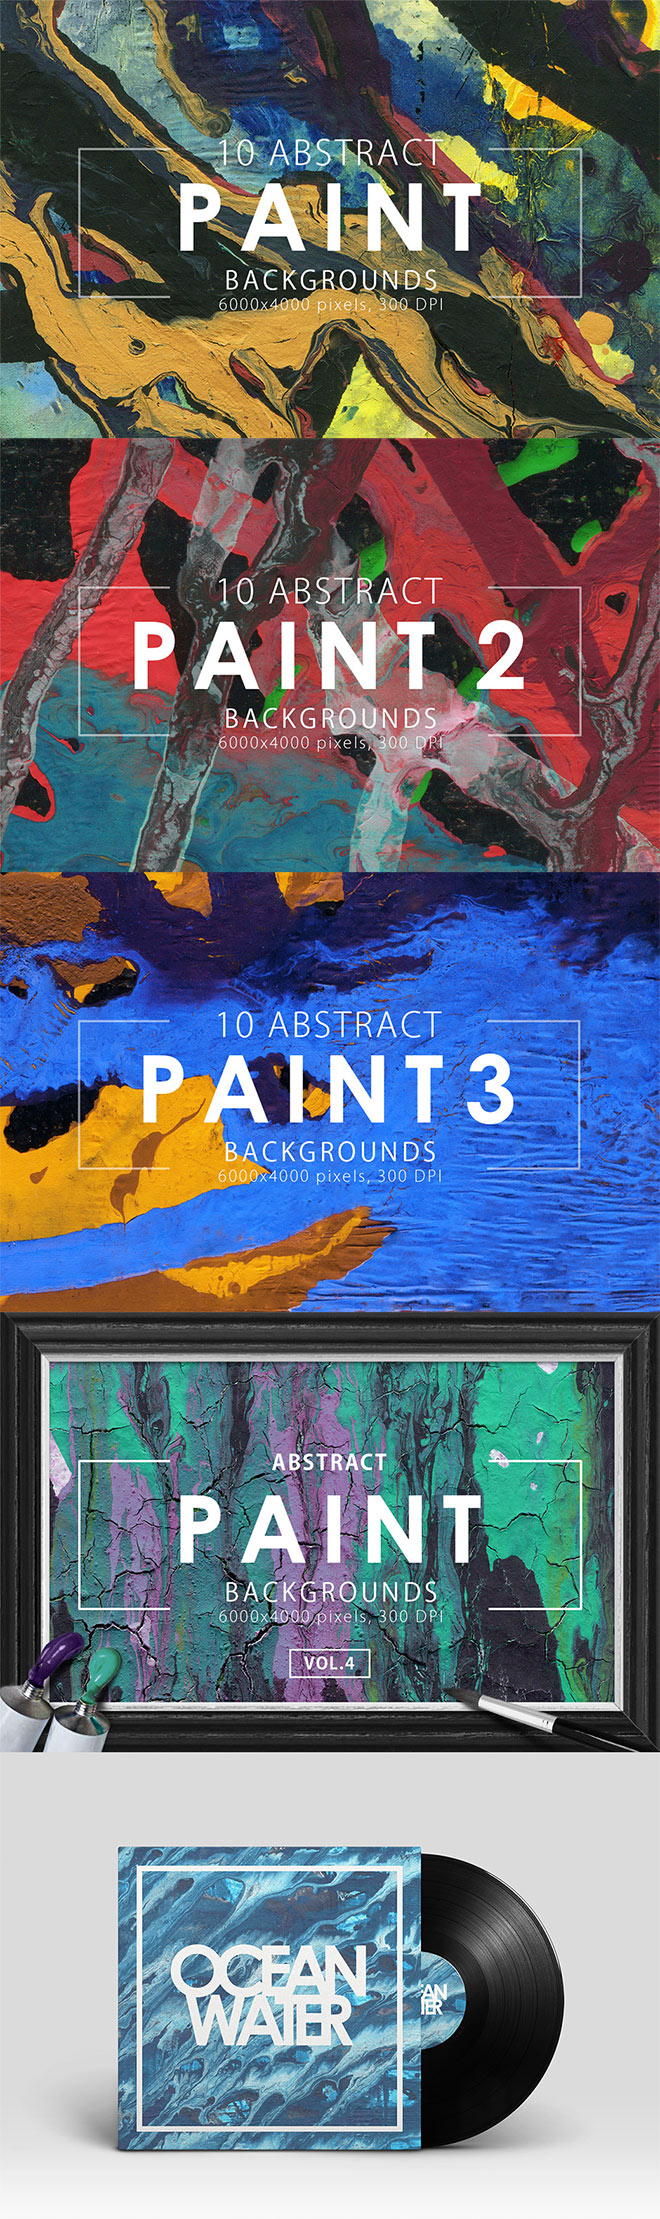 Abstract Paint Backgrounds